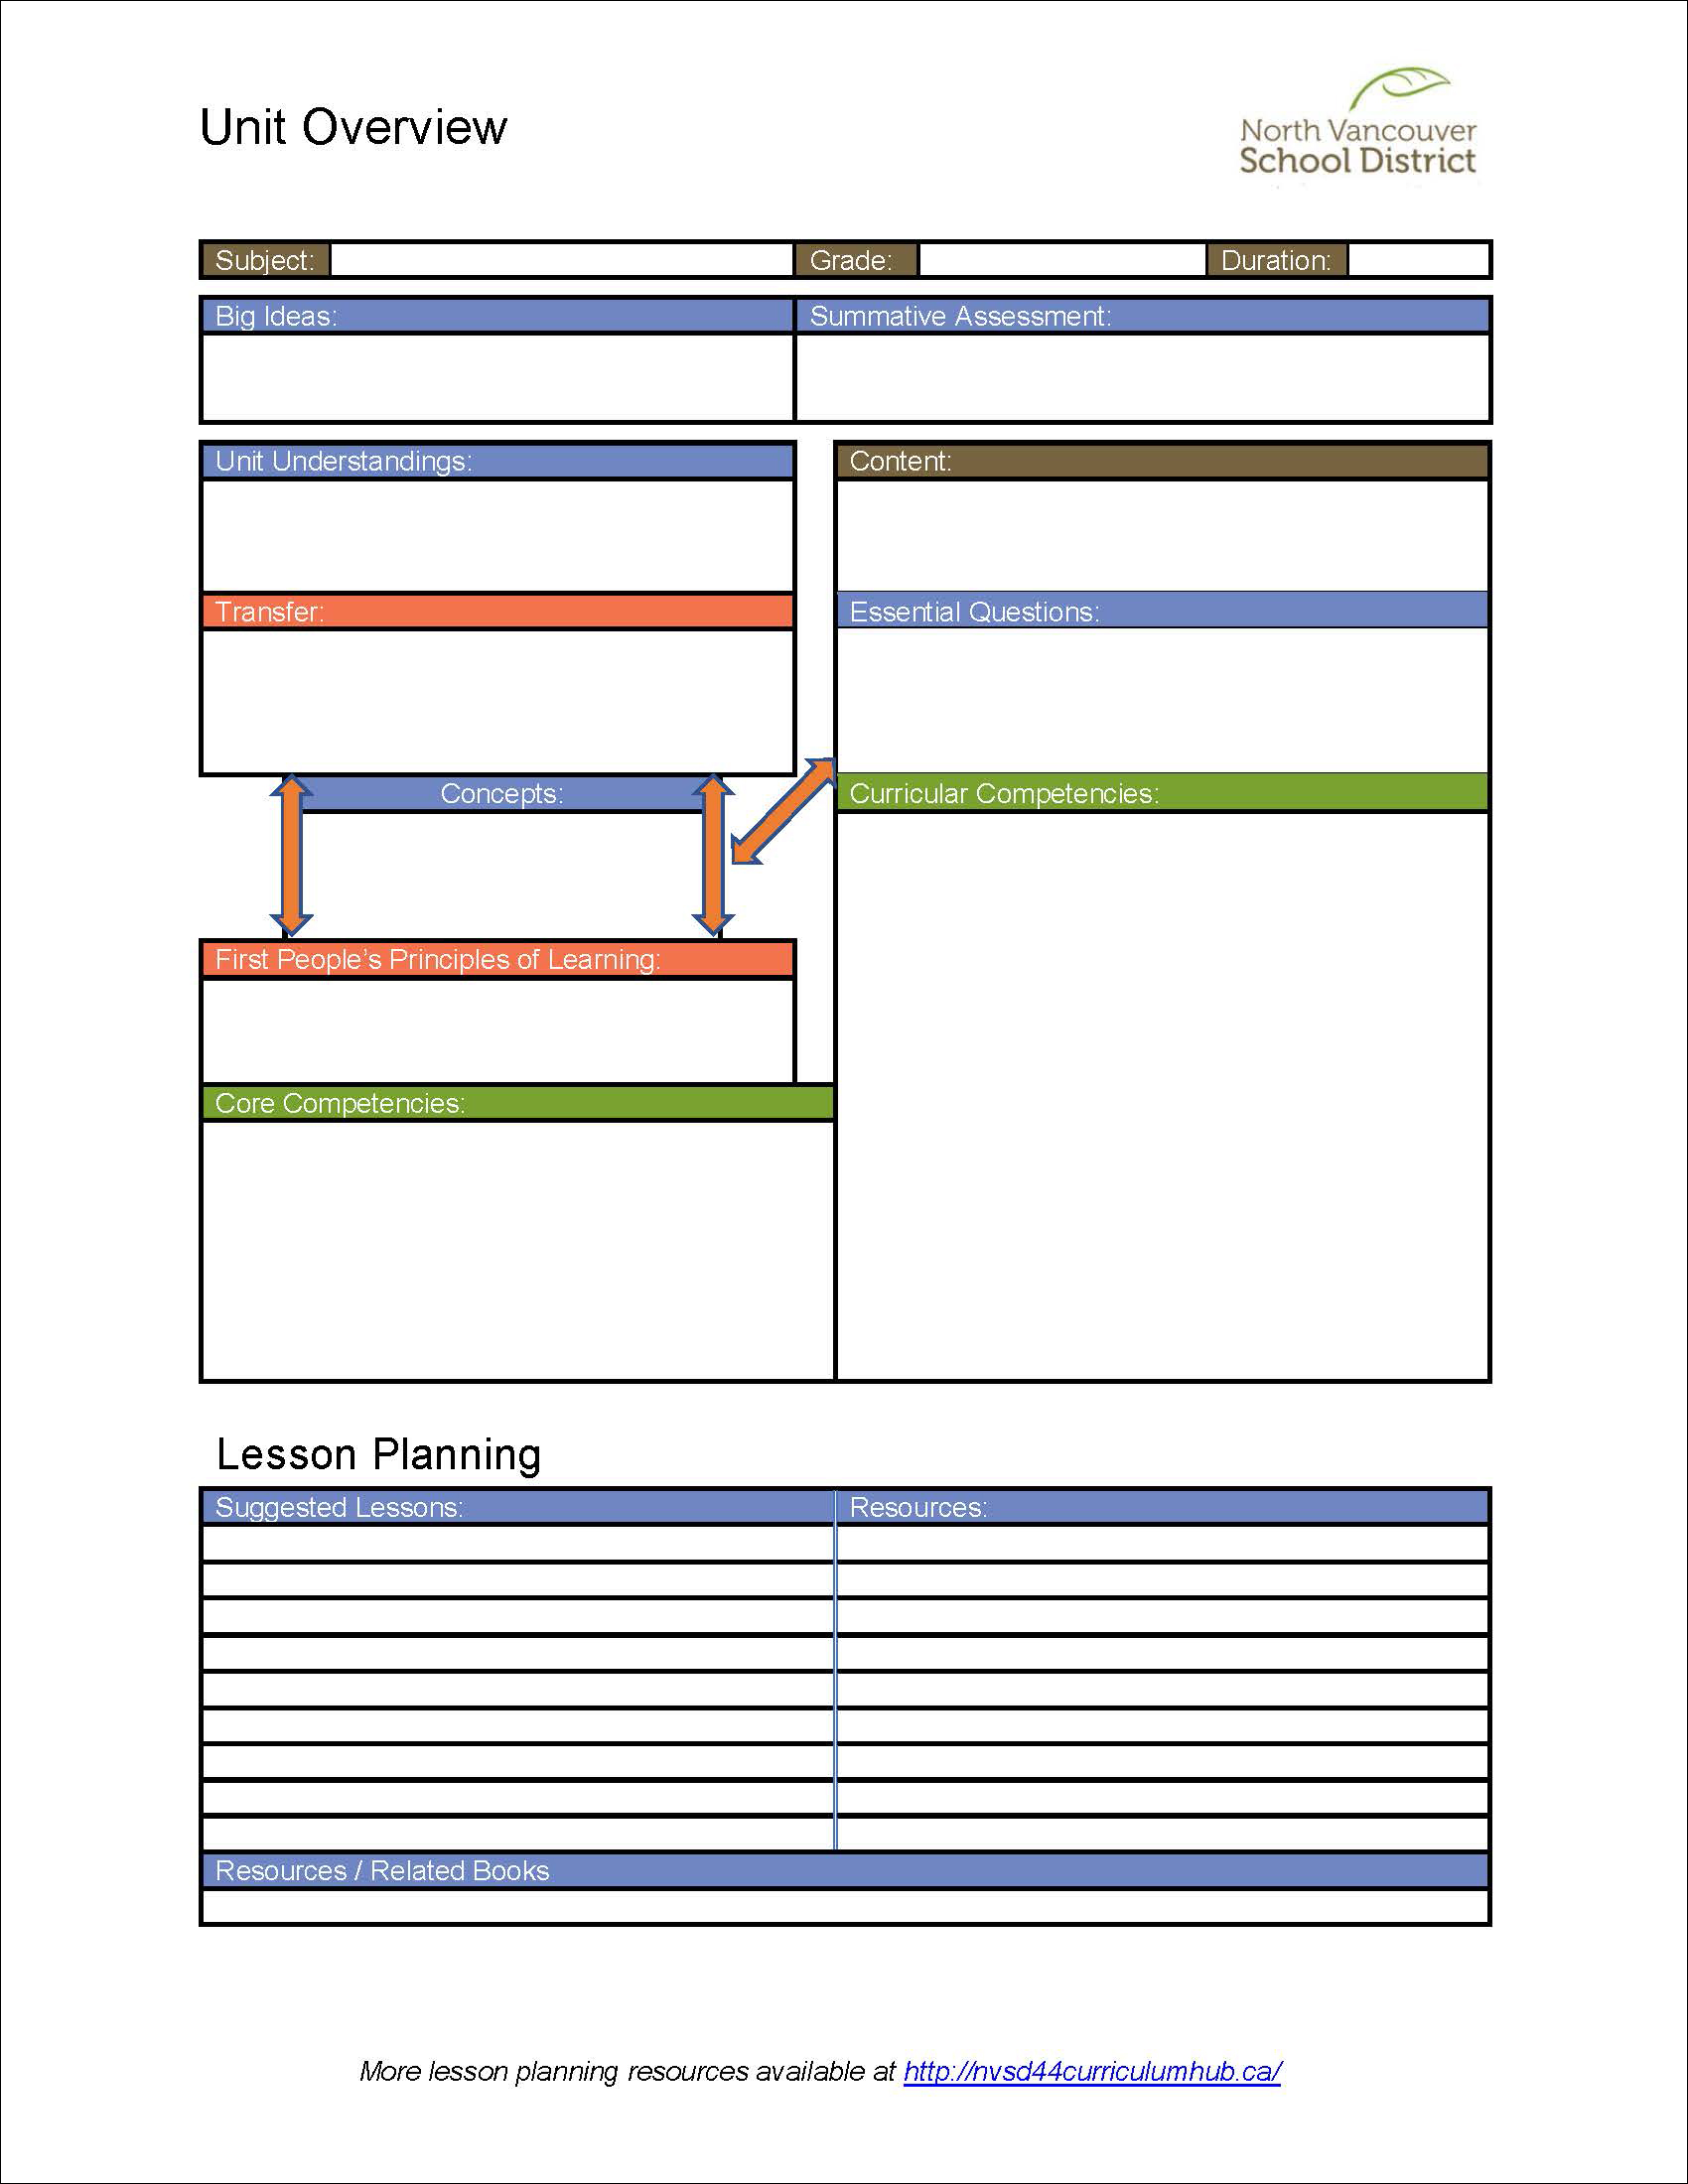 One Year Plan Template from nvsd44curriculumhub.ca